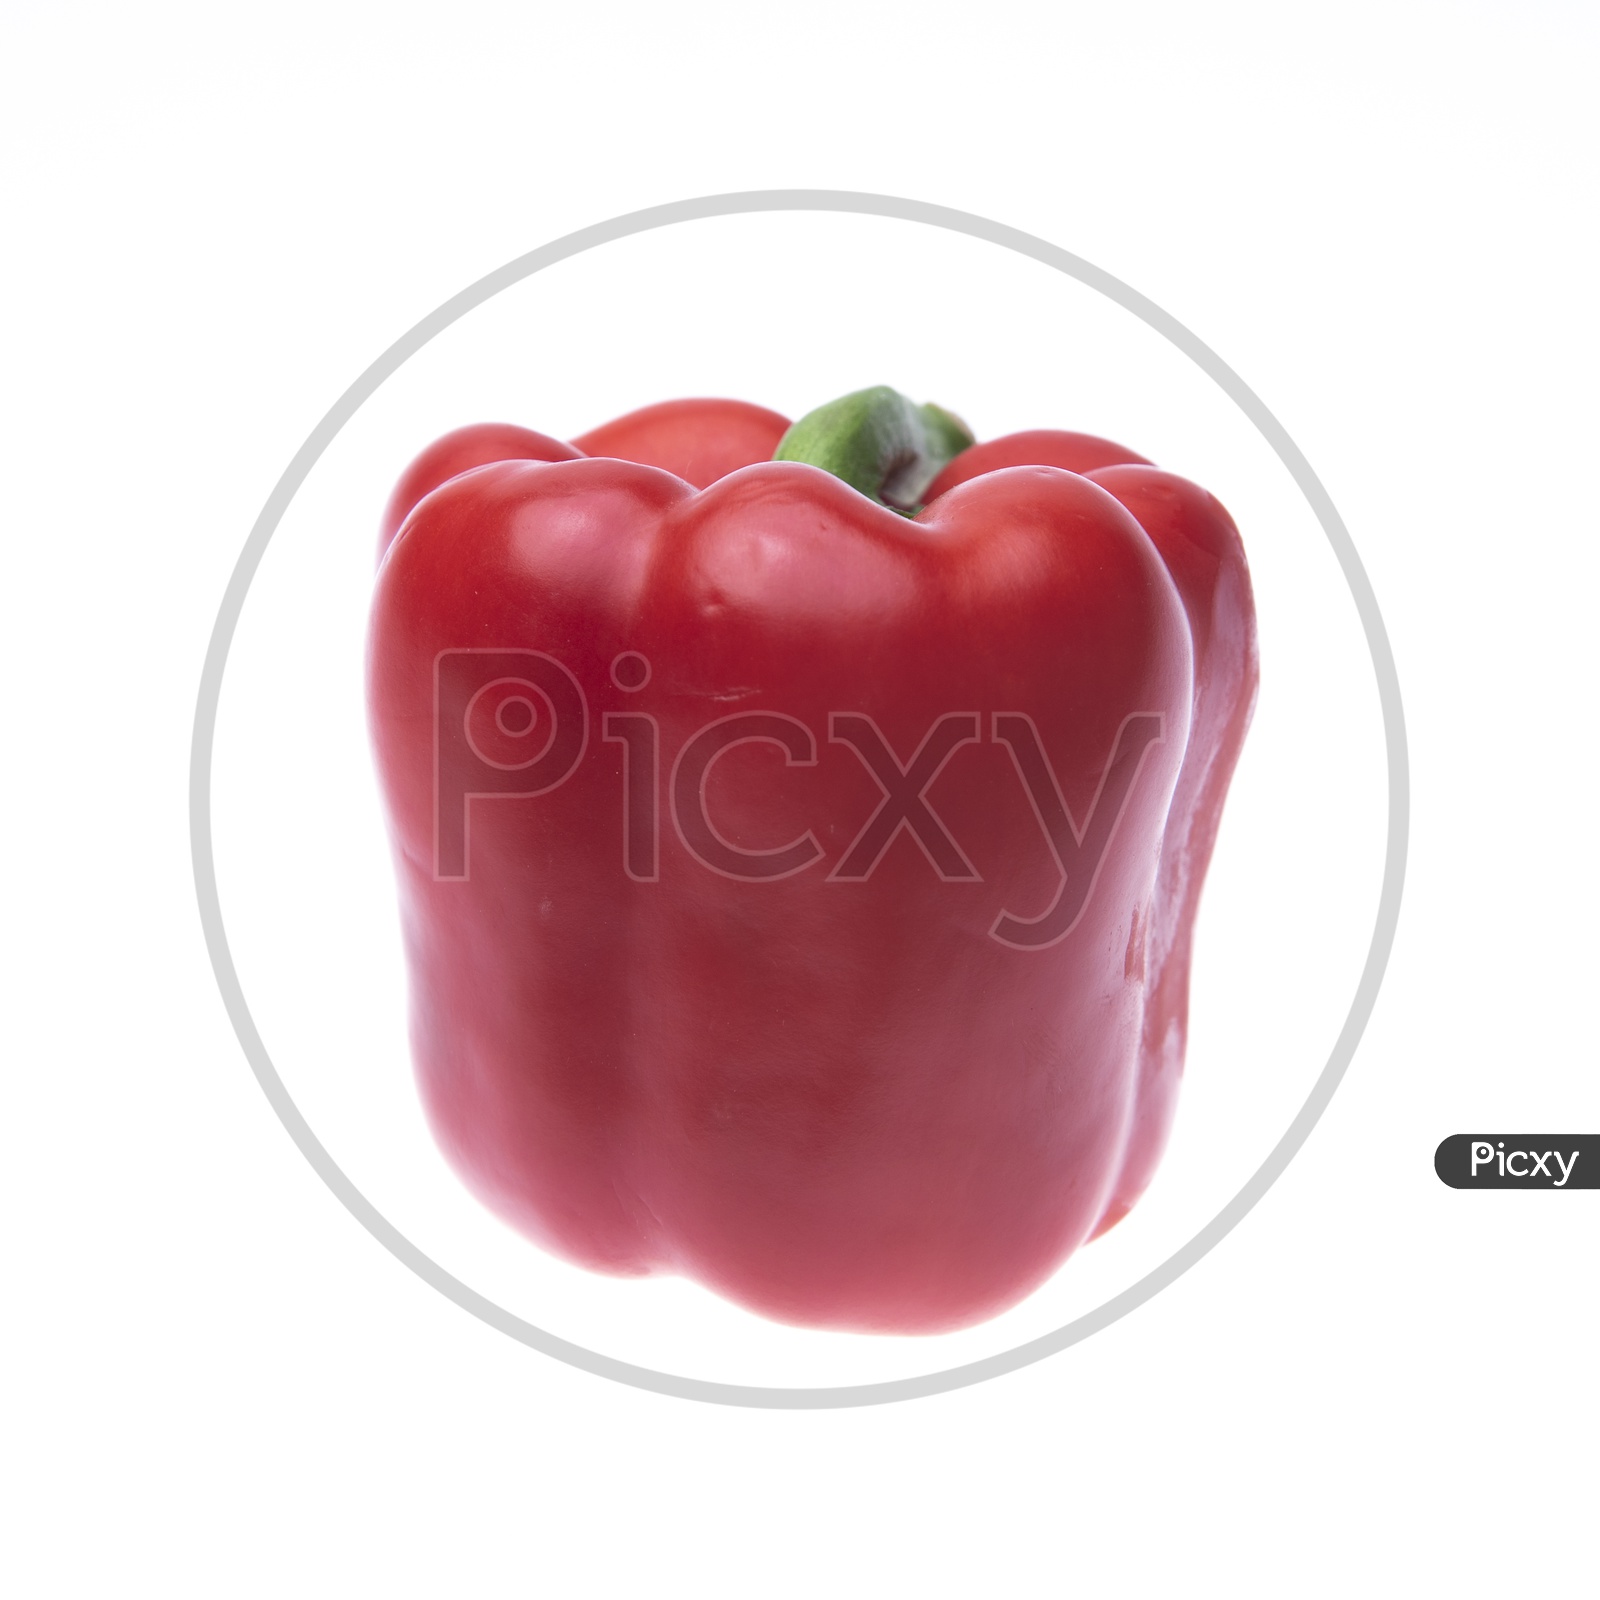 Sweet Pepper or Red Capsicum Isolated on White Background